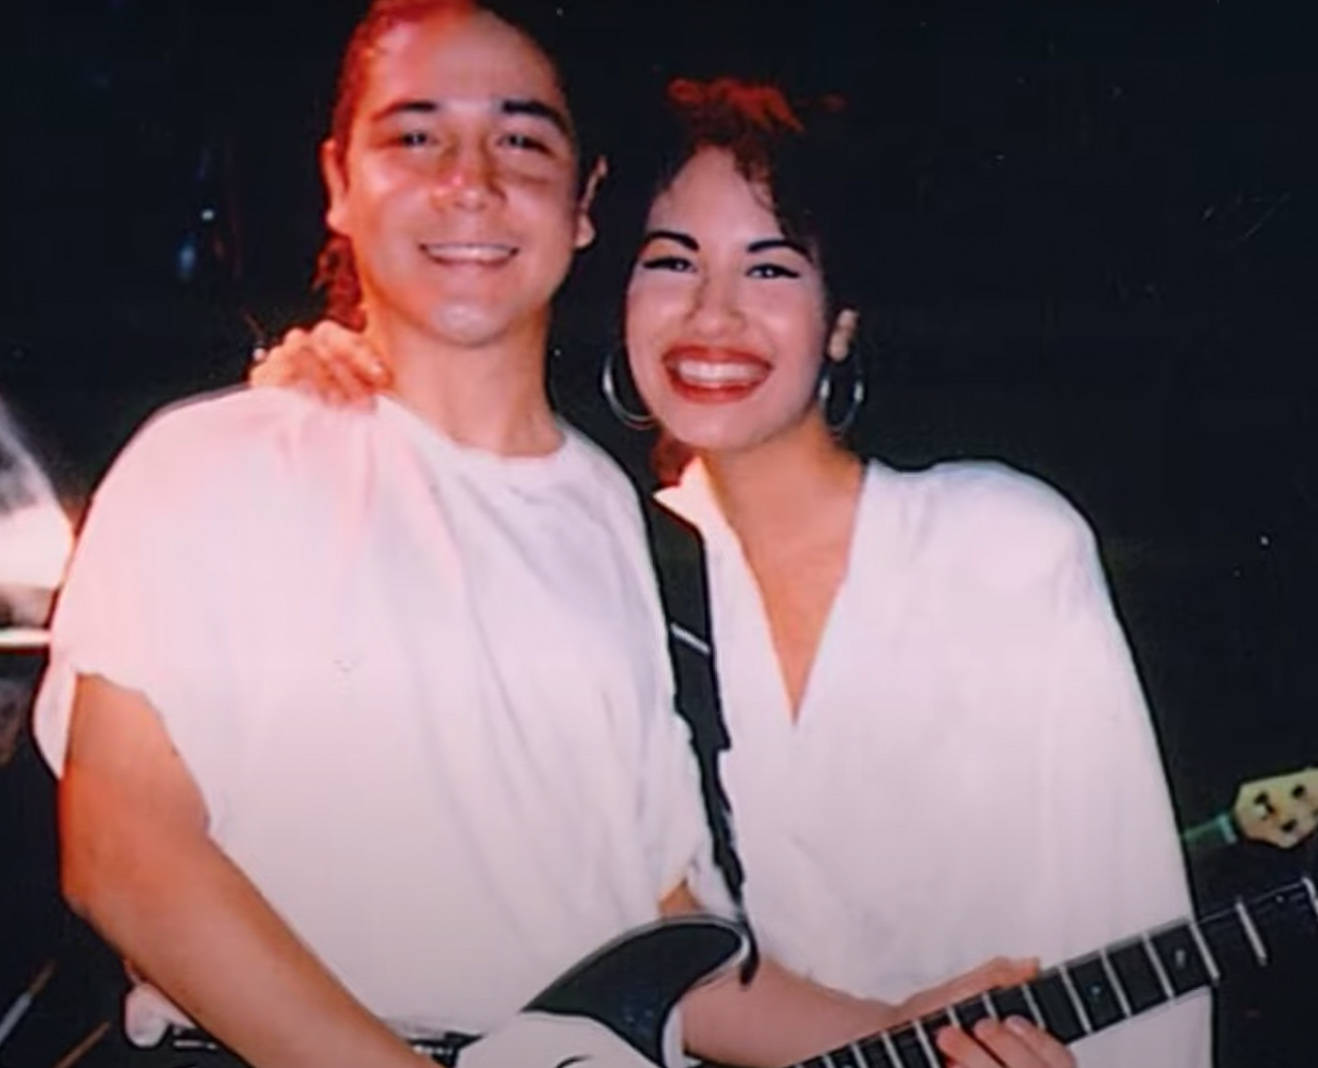 Queen Of Tejano Music: Selena Quintanilla On Stage Background